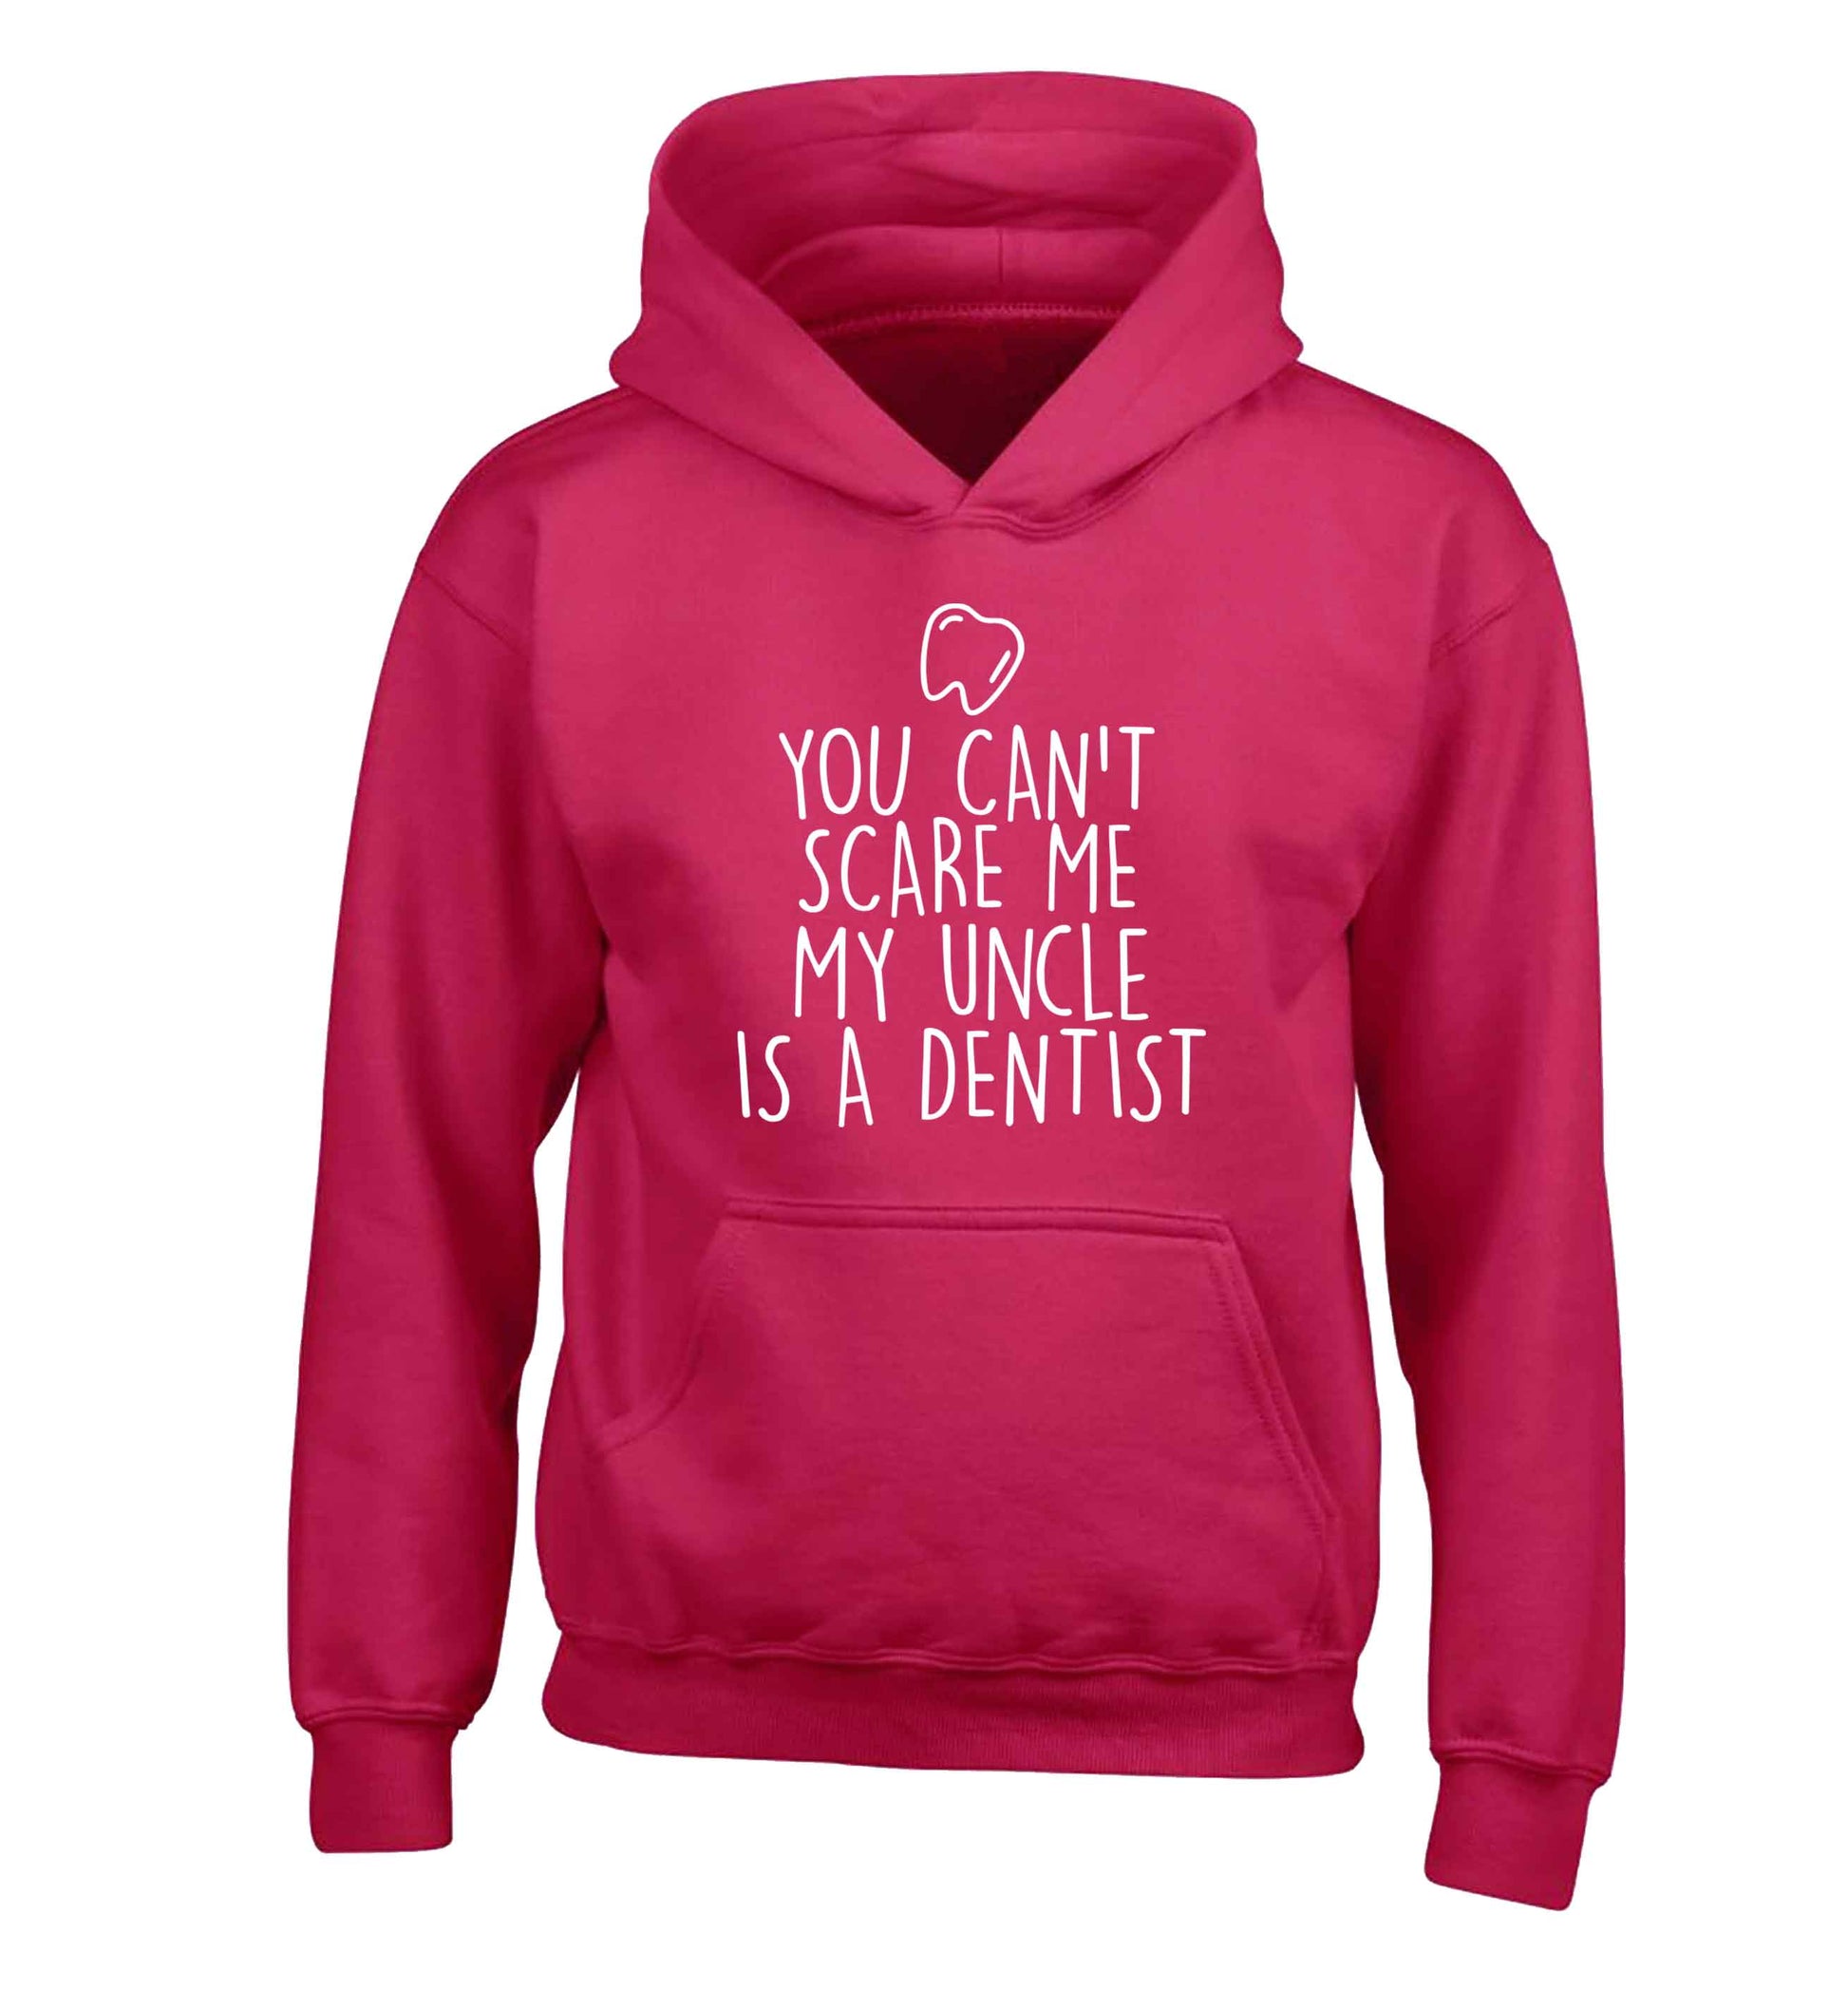 You can't scare me my uncle is a dentist children's pink hoodie 12-13 Years